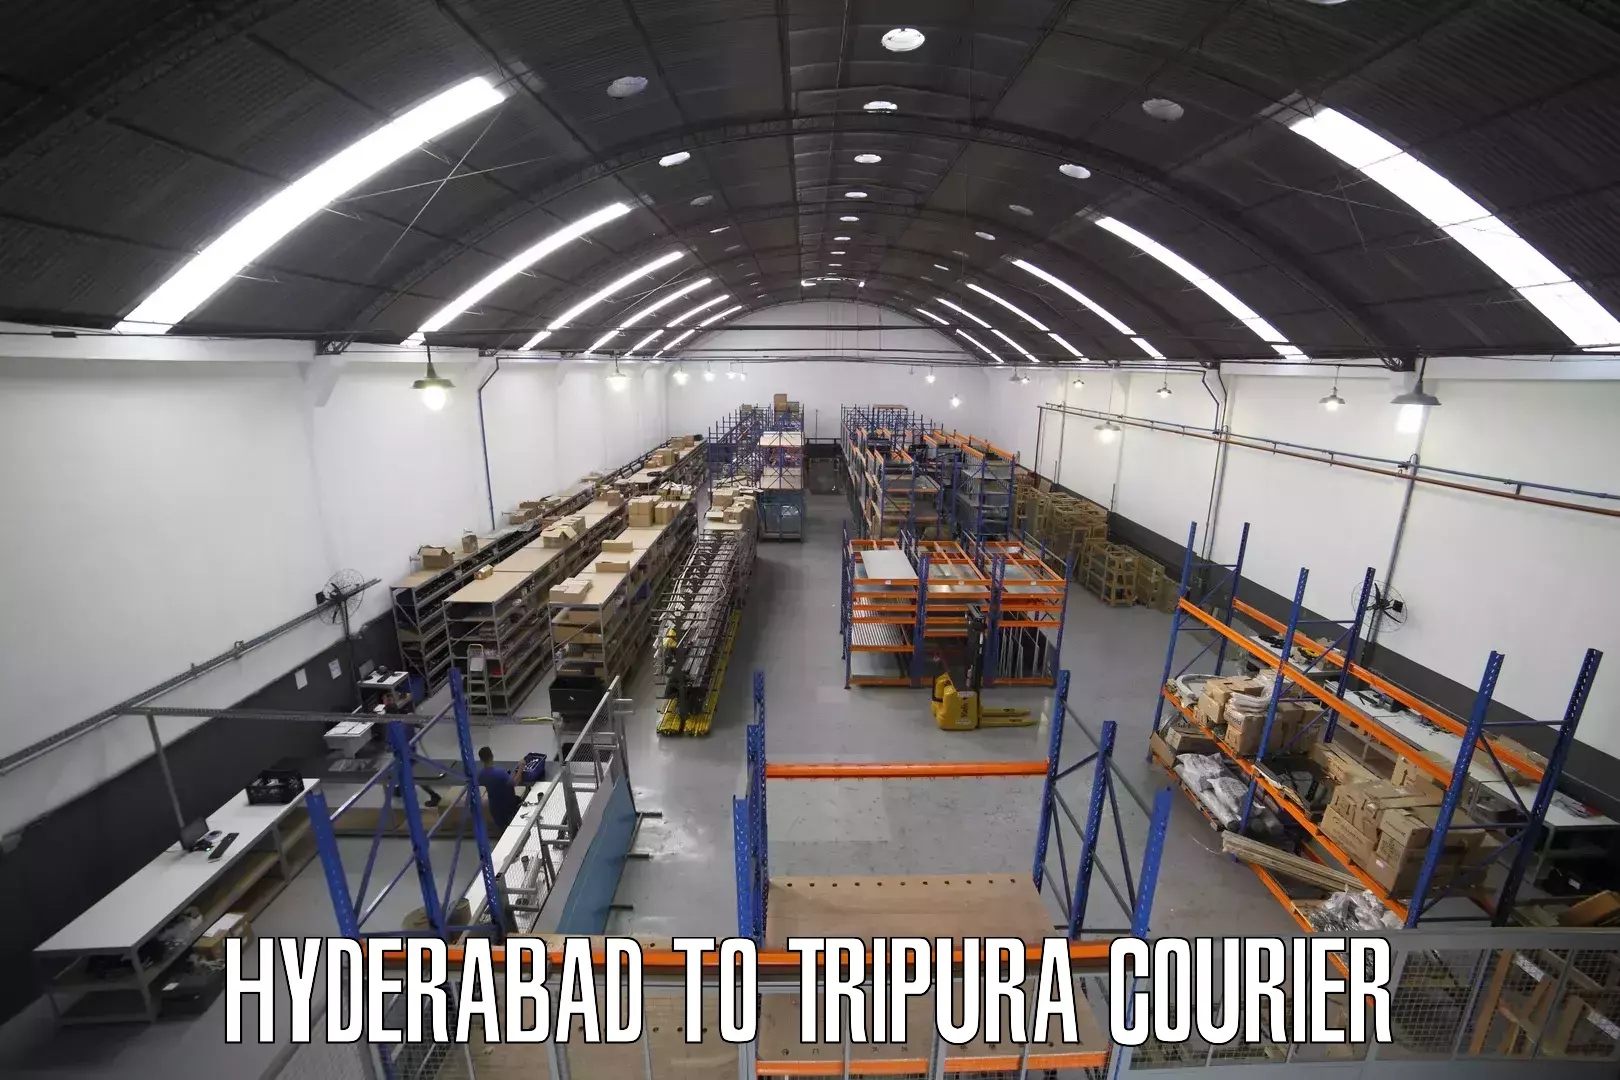 Courier service innovation Hyderabad to Tripura